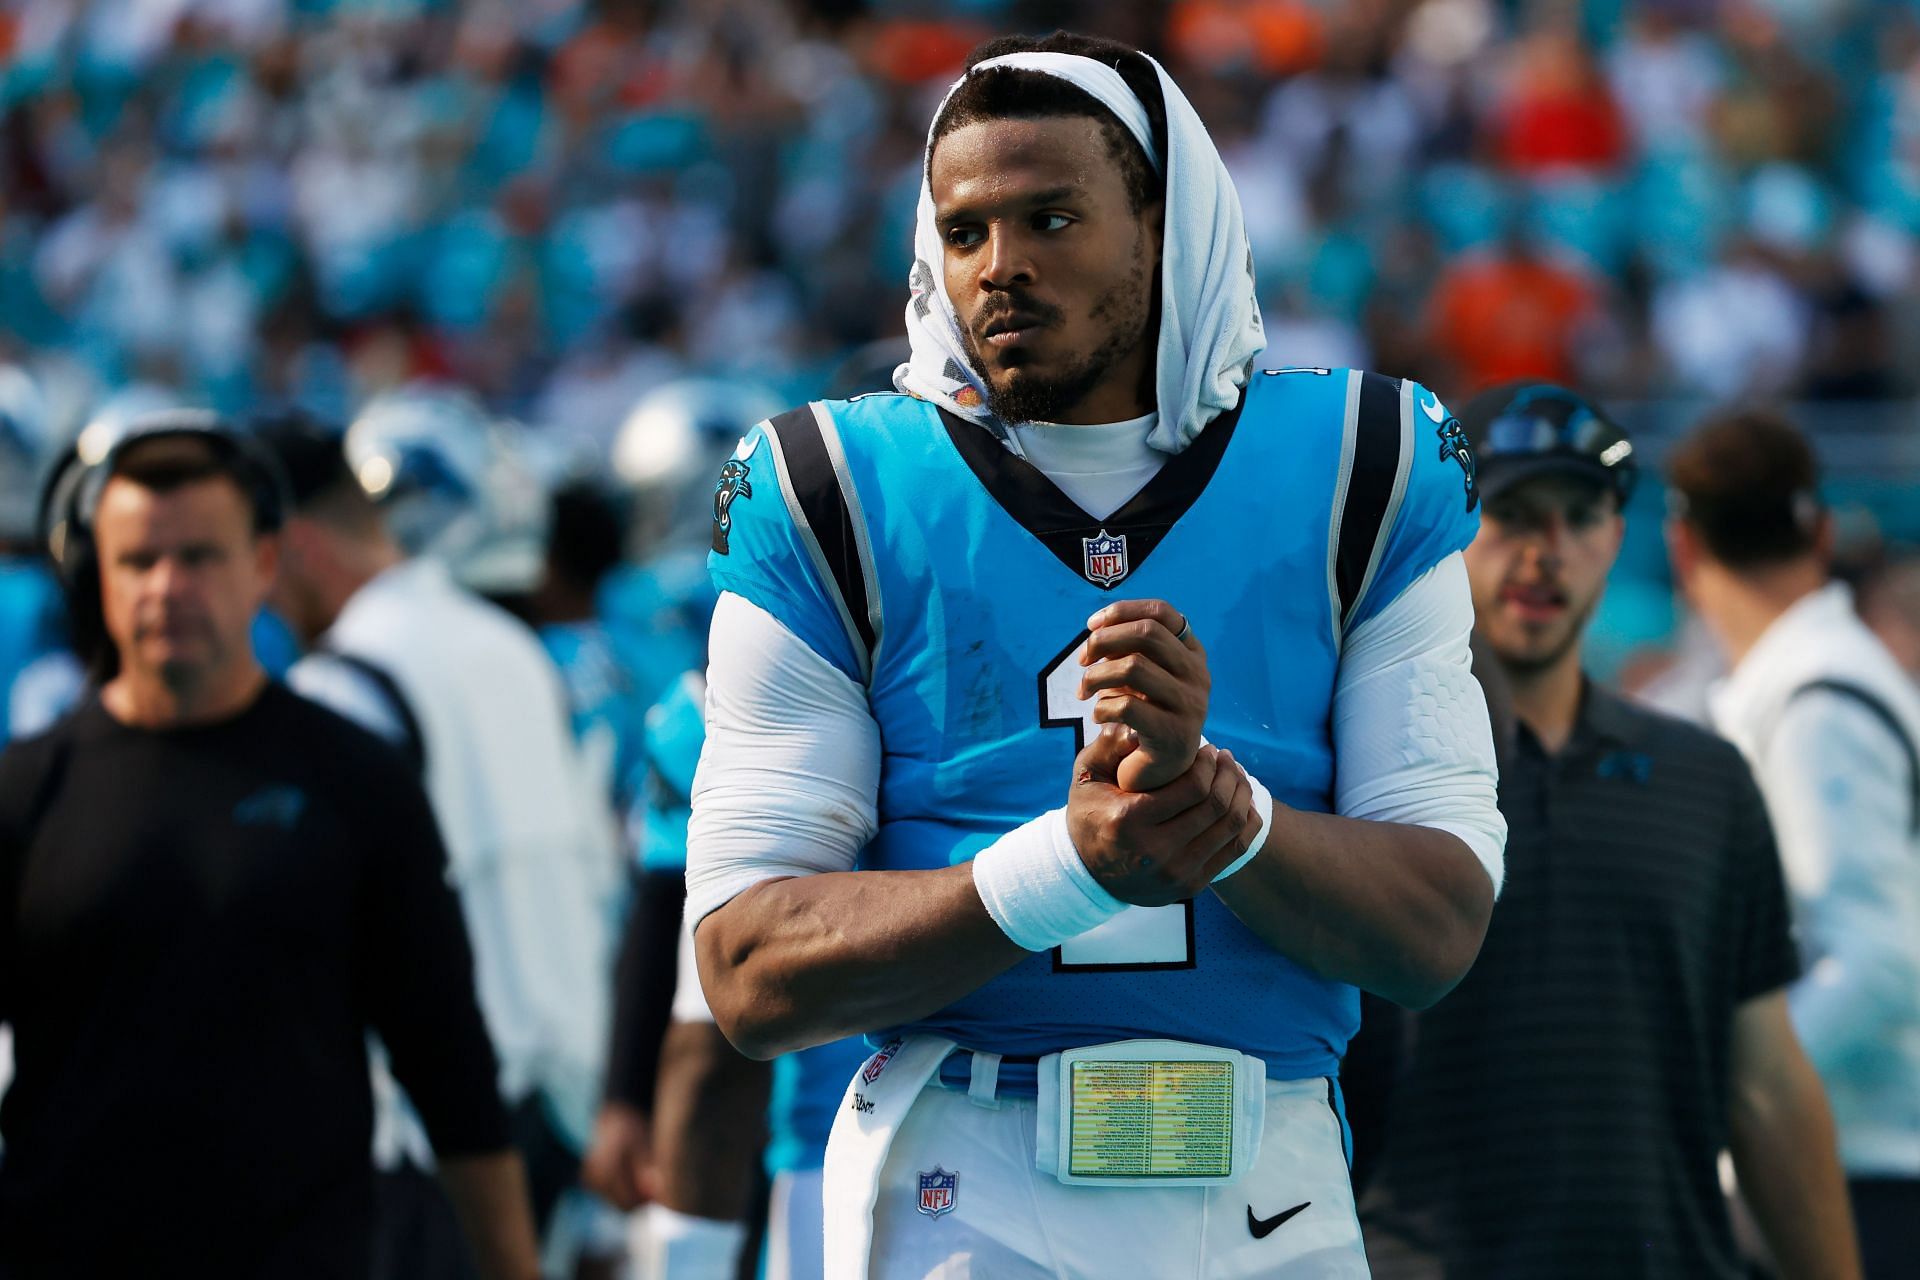 There is a bevy of options for Cam Newton